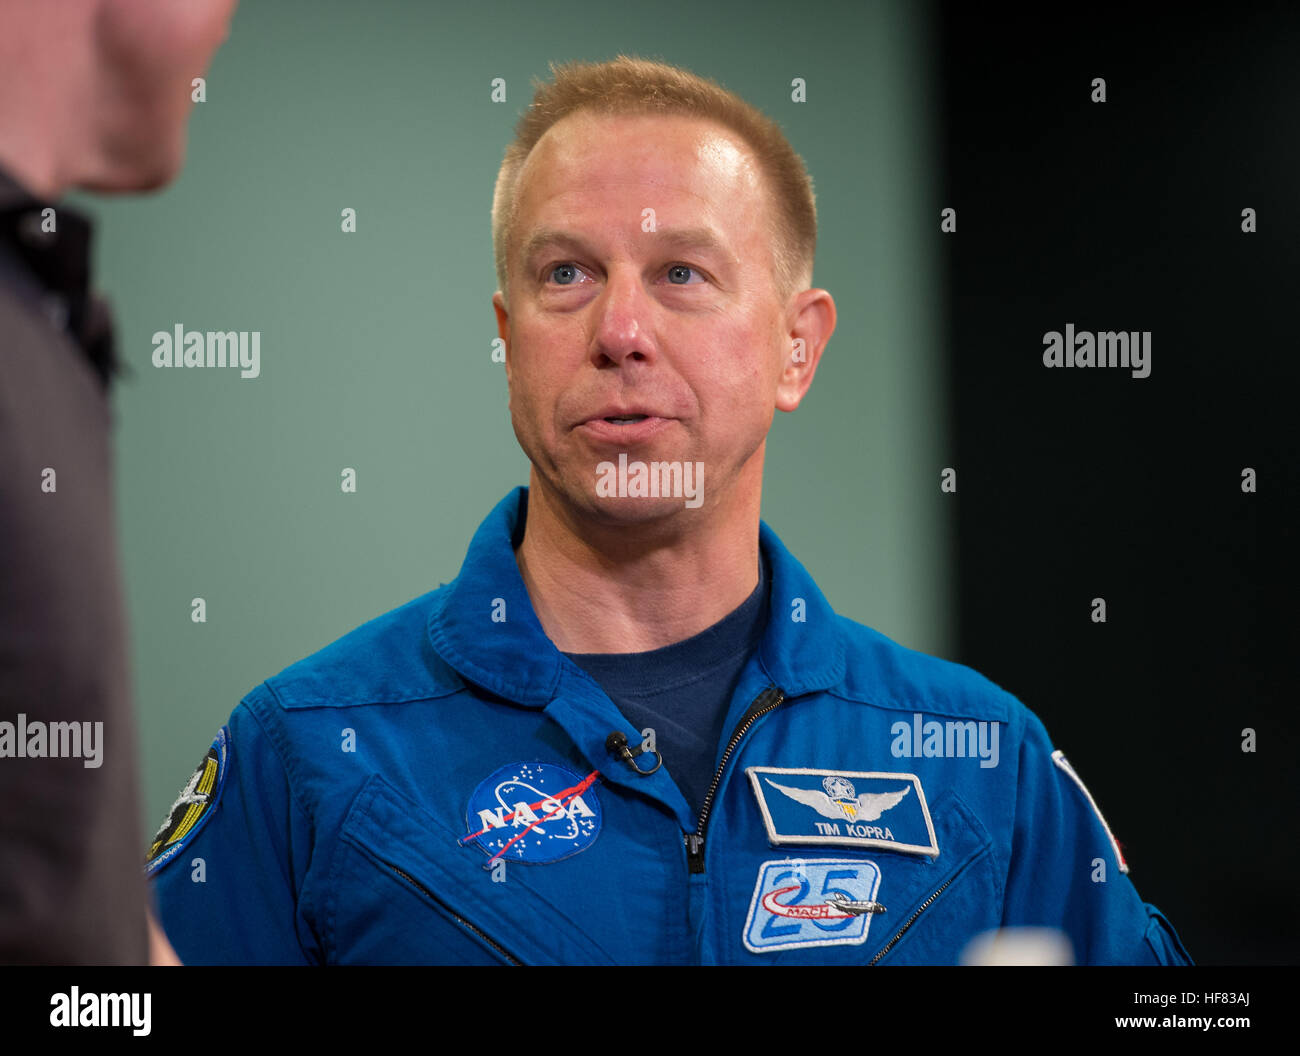 NASA astronaut Tim Kopra, speaks during a social media event with the U.S. Army, Tuesday, September 13, 2016 at the Smithsonian National Air and Space Museum in Washington. Aubrey Gemignani) Stock Photo